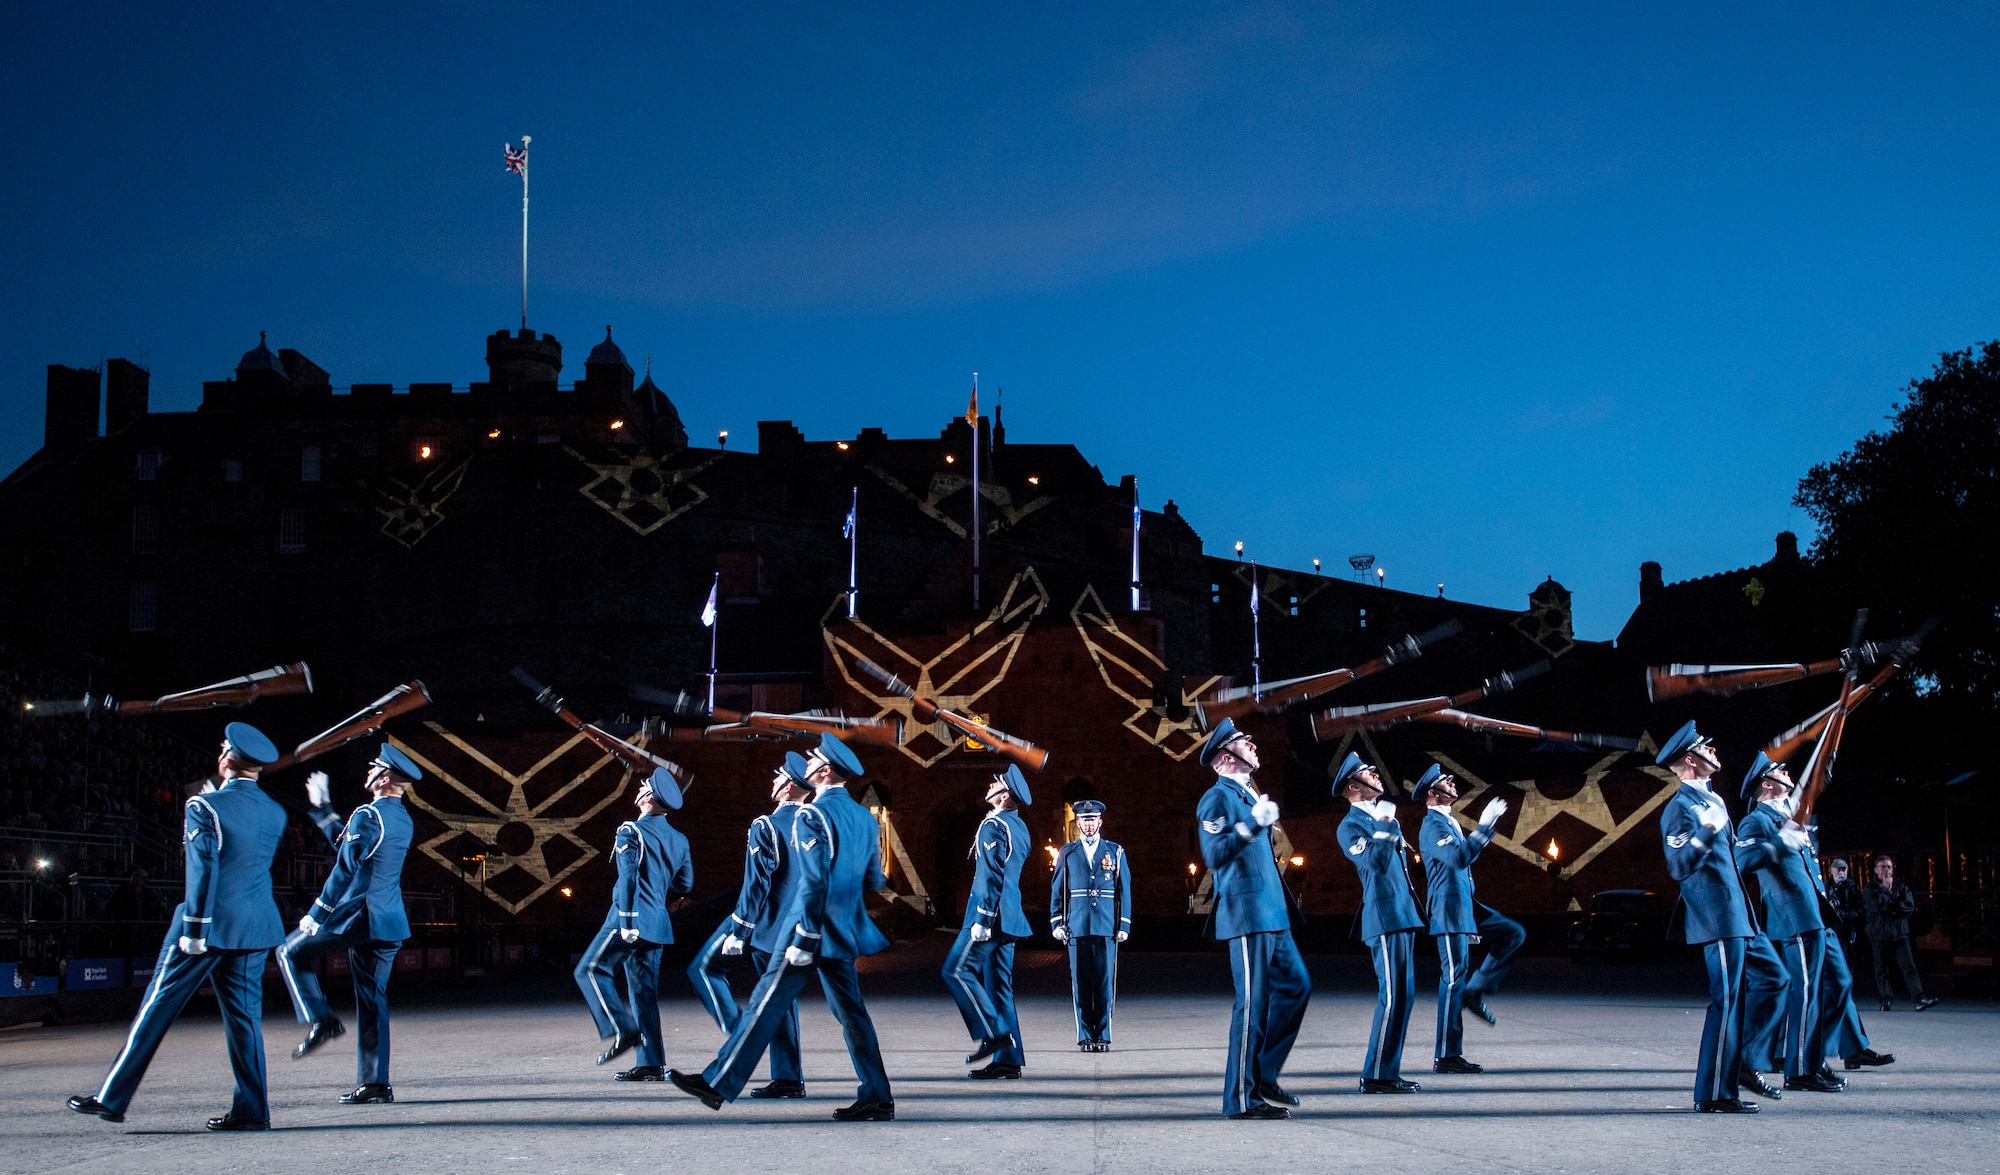 The United States Air Force Honor Guard Drill Team poses for a group photo after performing at the Royal Edinburgh Military Tattoo on the Esplanade of the Edinburgh Castle in Edinburgh, Scotland Aug. 6, 2015. A 20-member group of the Honor Guard Drill Team traveled to the United Kingdom to represent the USAF and the Department of Defense as the only branch of military service from the U.S. performing in the tattoo. (U.S. Air Force photo/Staff Sgt. Nichelle Anderson/Released)